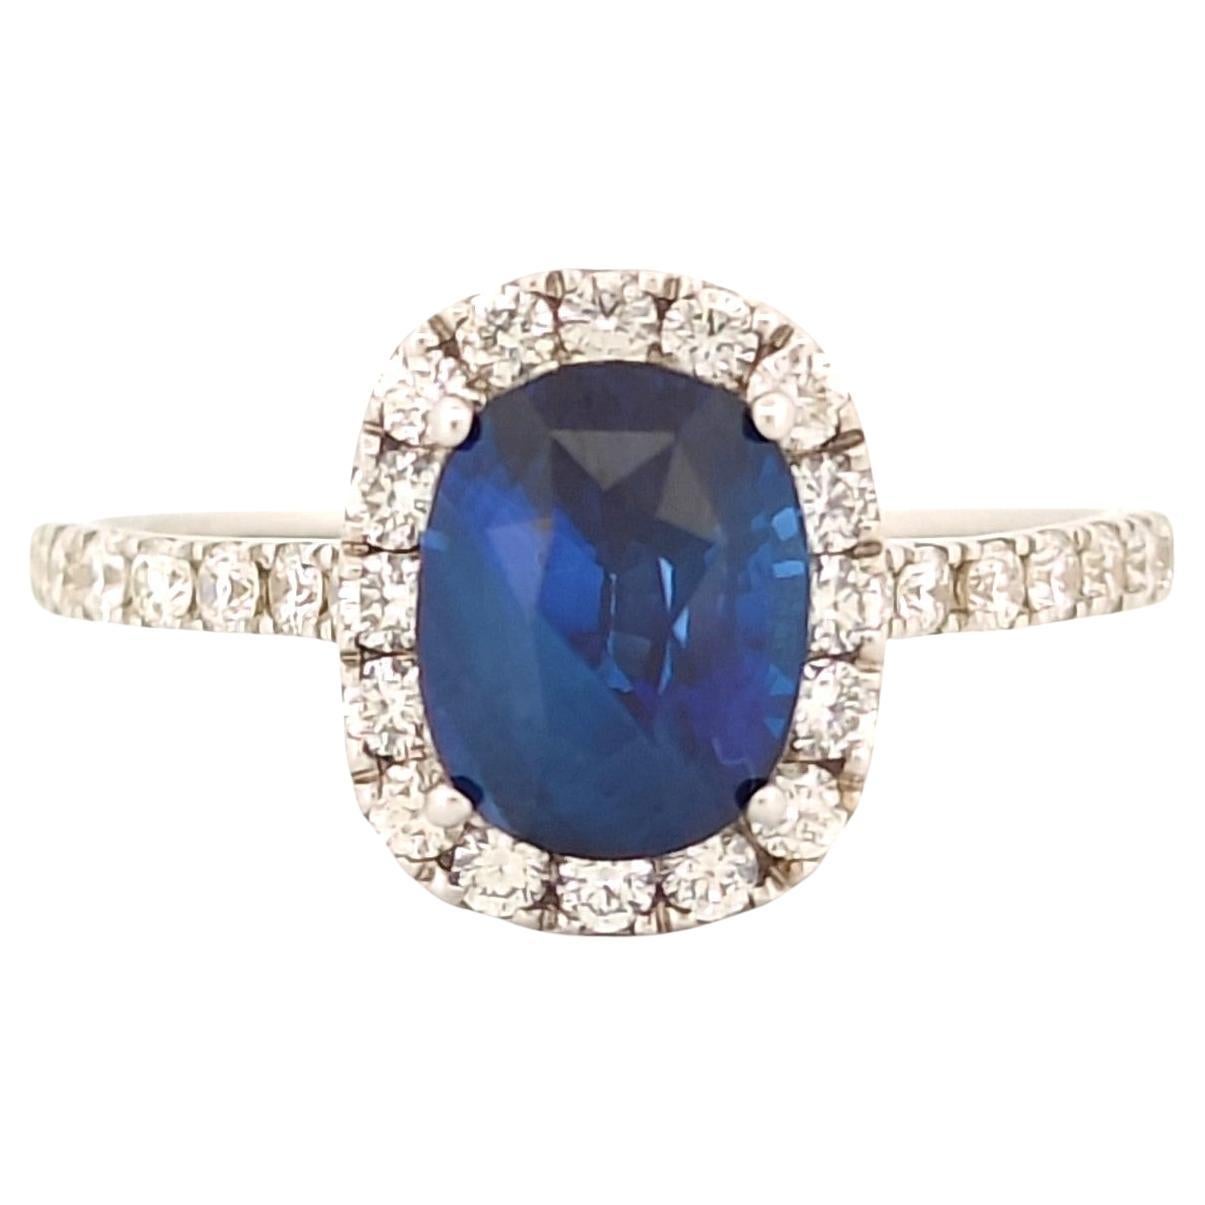 2.24 Ct Royal Blue Sapphire with Halo Diamonds 14K White Gold Ring